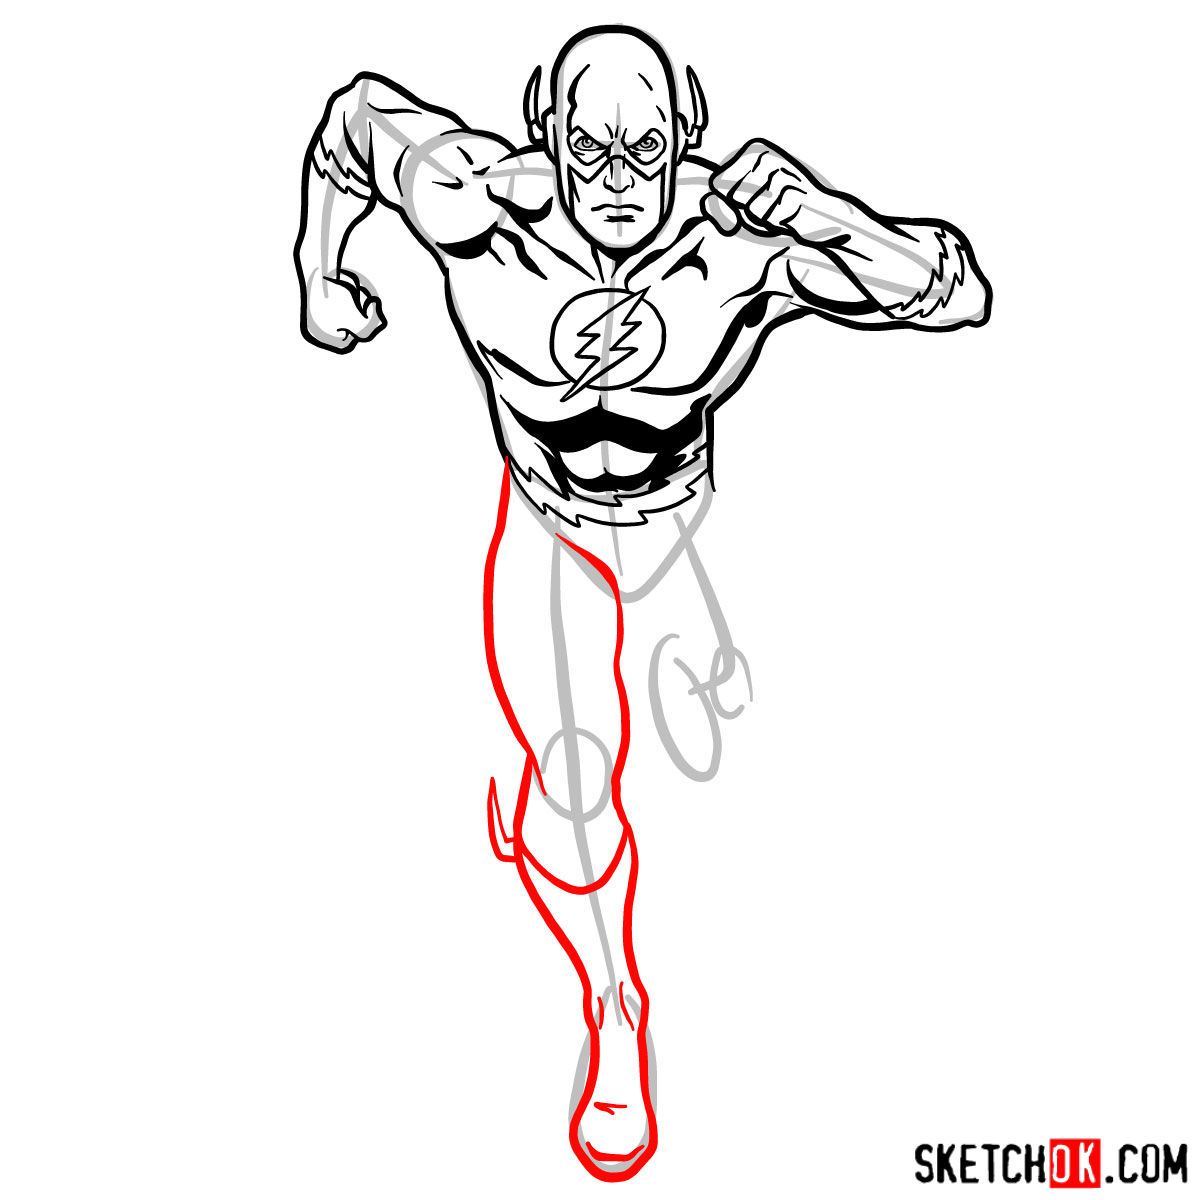 How to draw Flash (Barry Allen) - Sketchok easy drawing guides